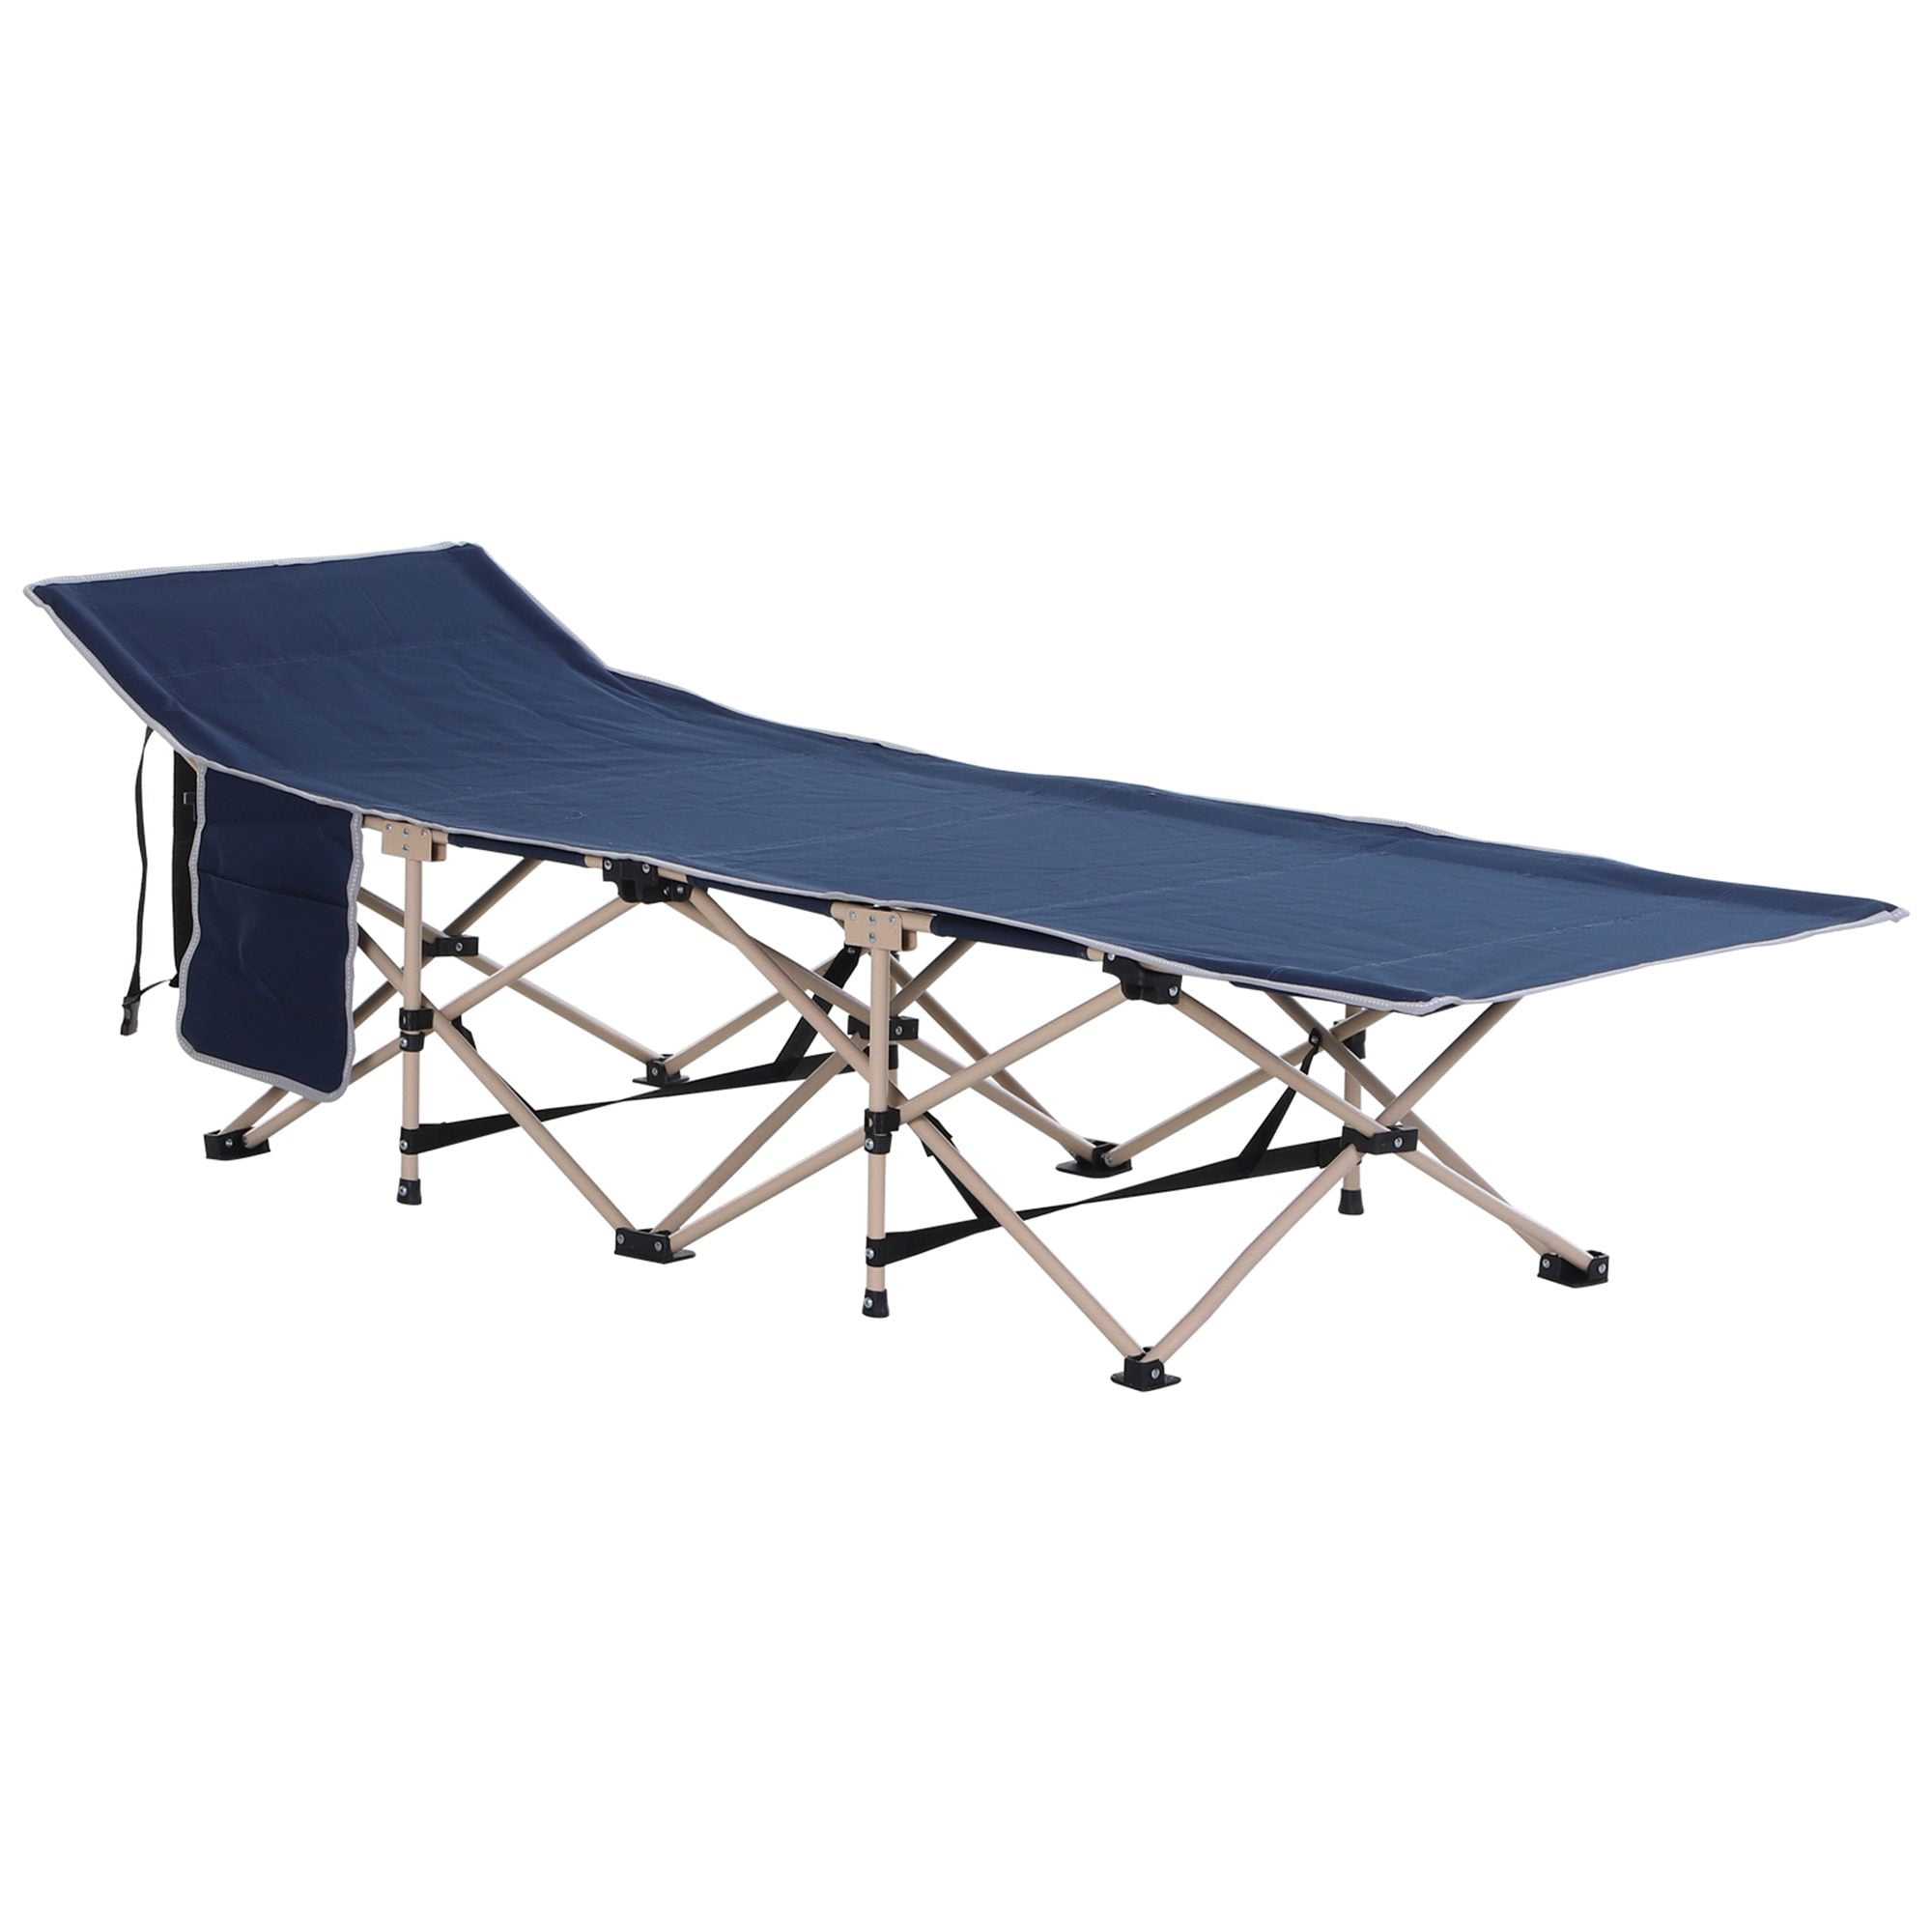 Outsunny Camping Folding Cot Outdoor Patio Sleeping Bed Travel Super Light Guest 